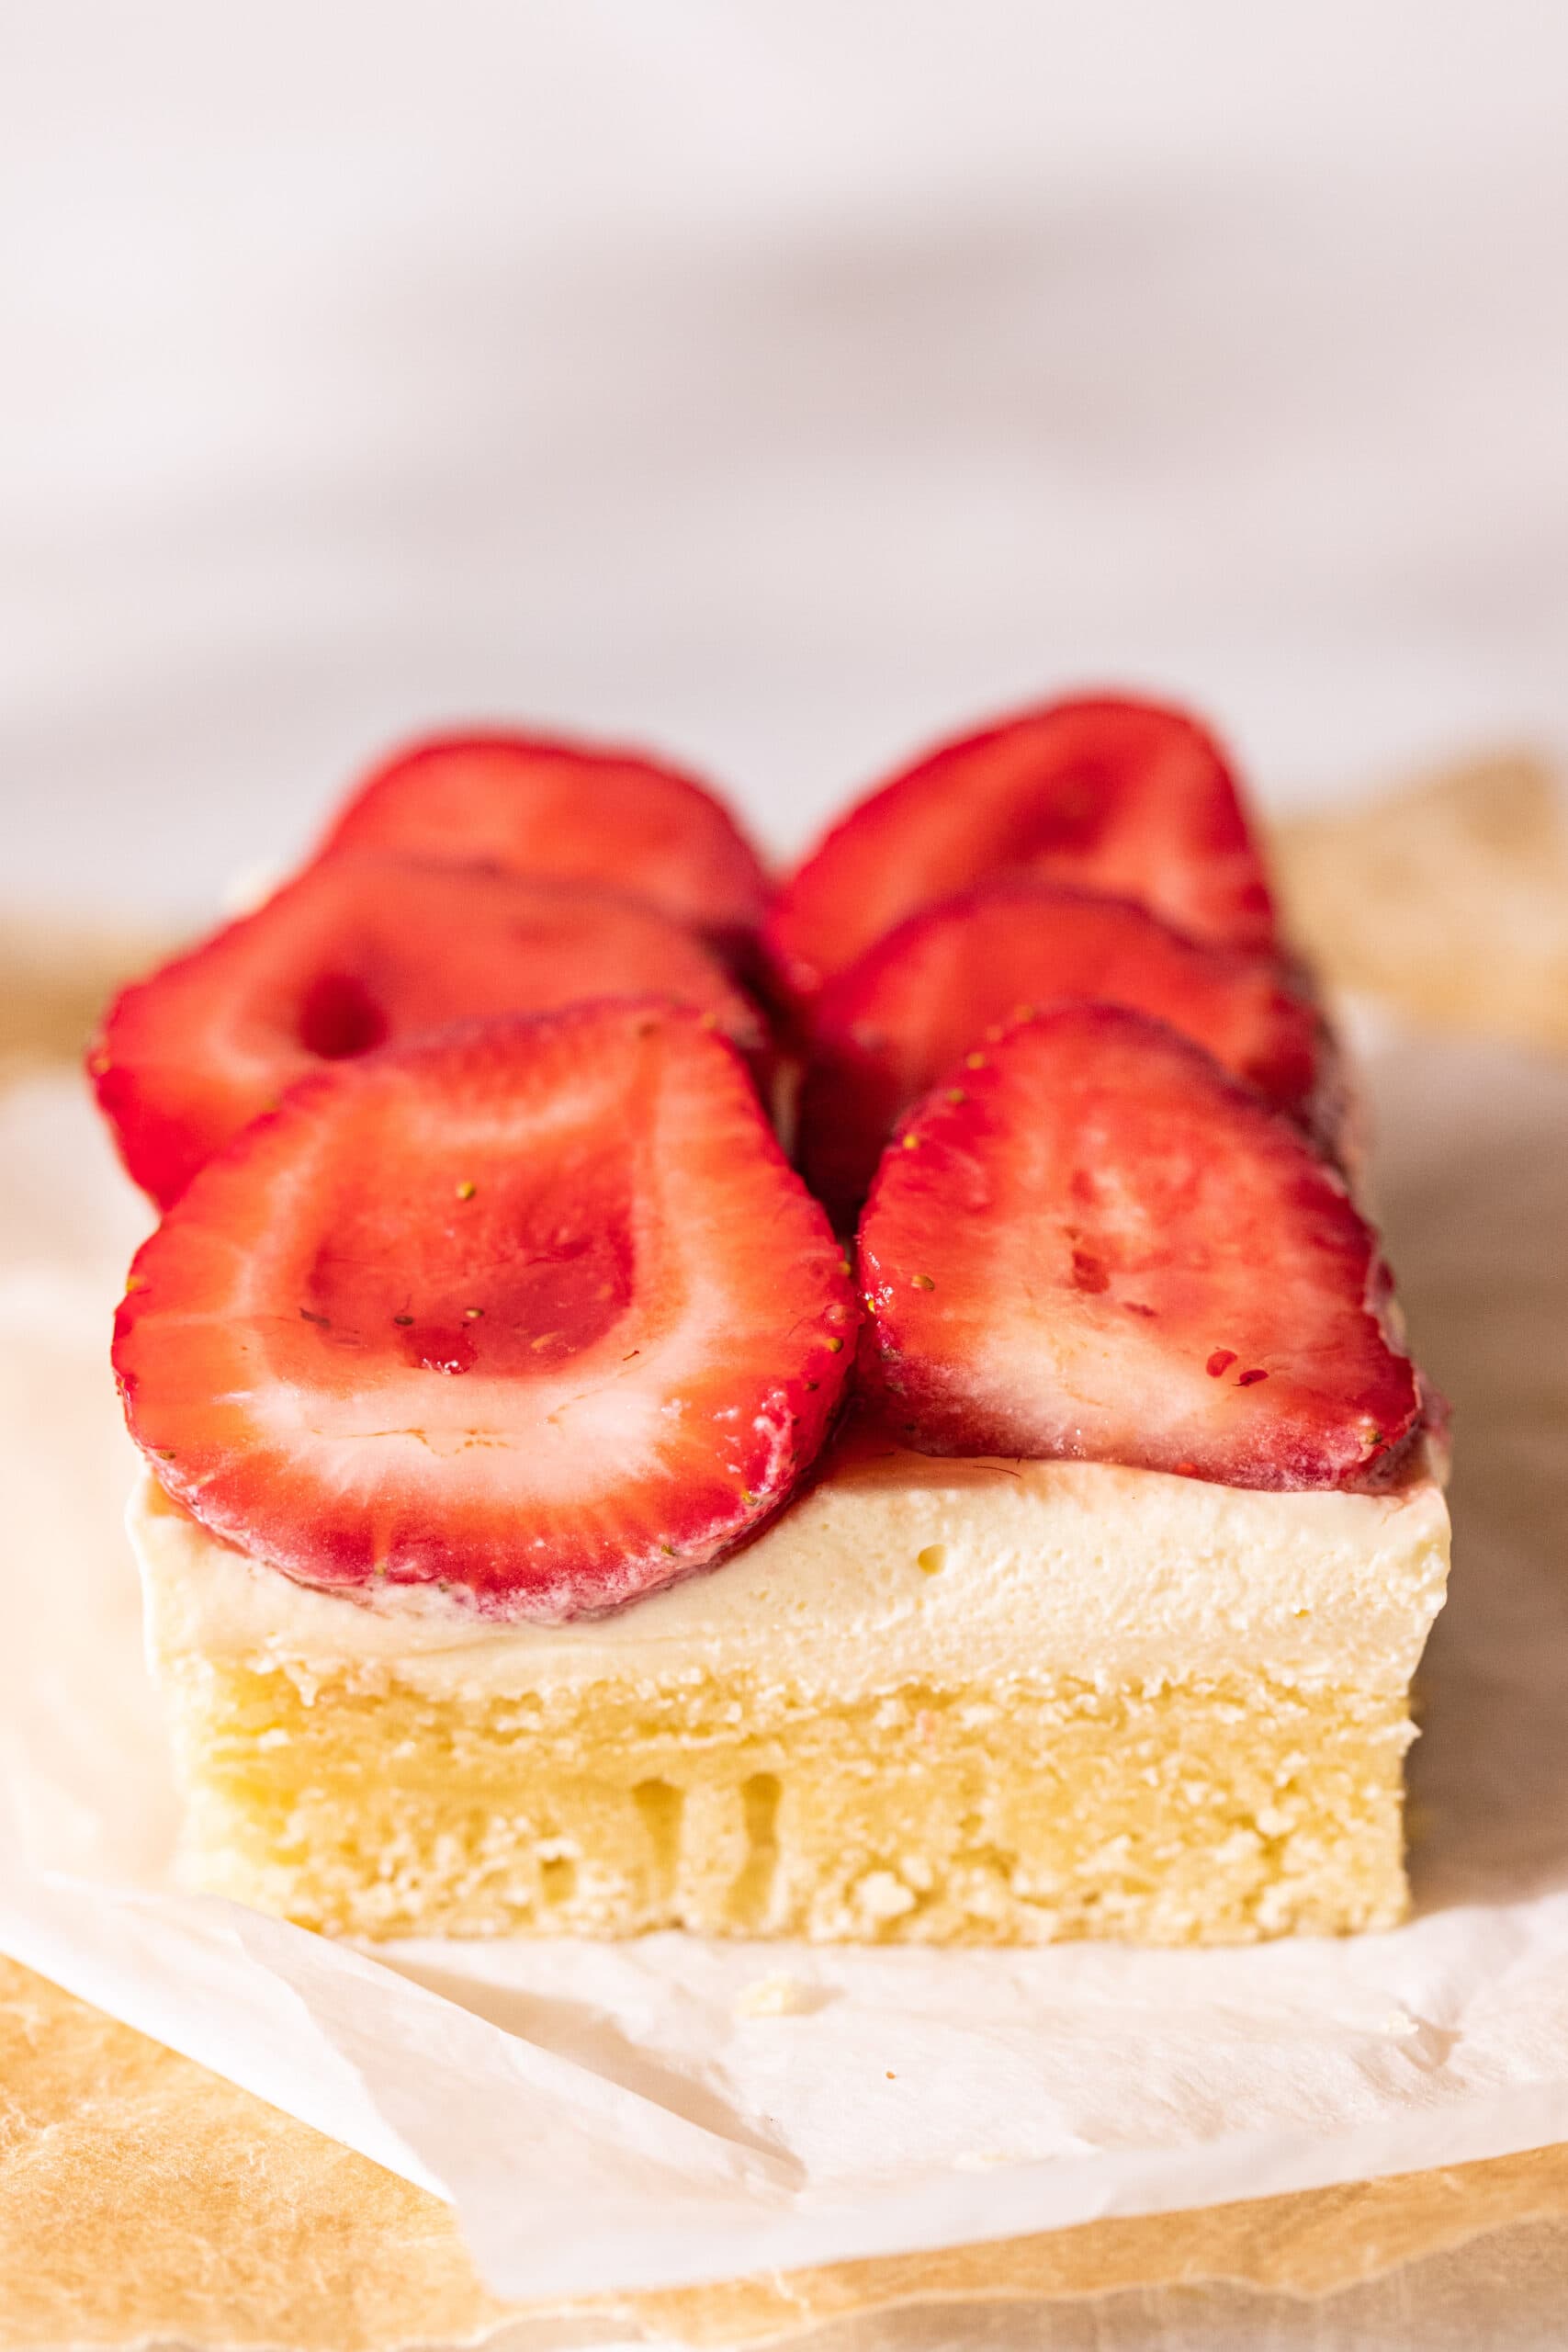 Cross section view of strawberry and cream cake where the vanilla cake, cream, and strawberries are visible.